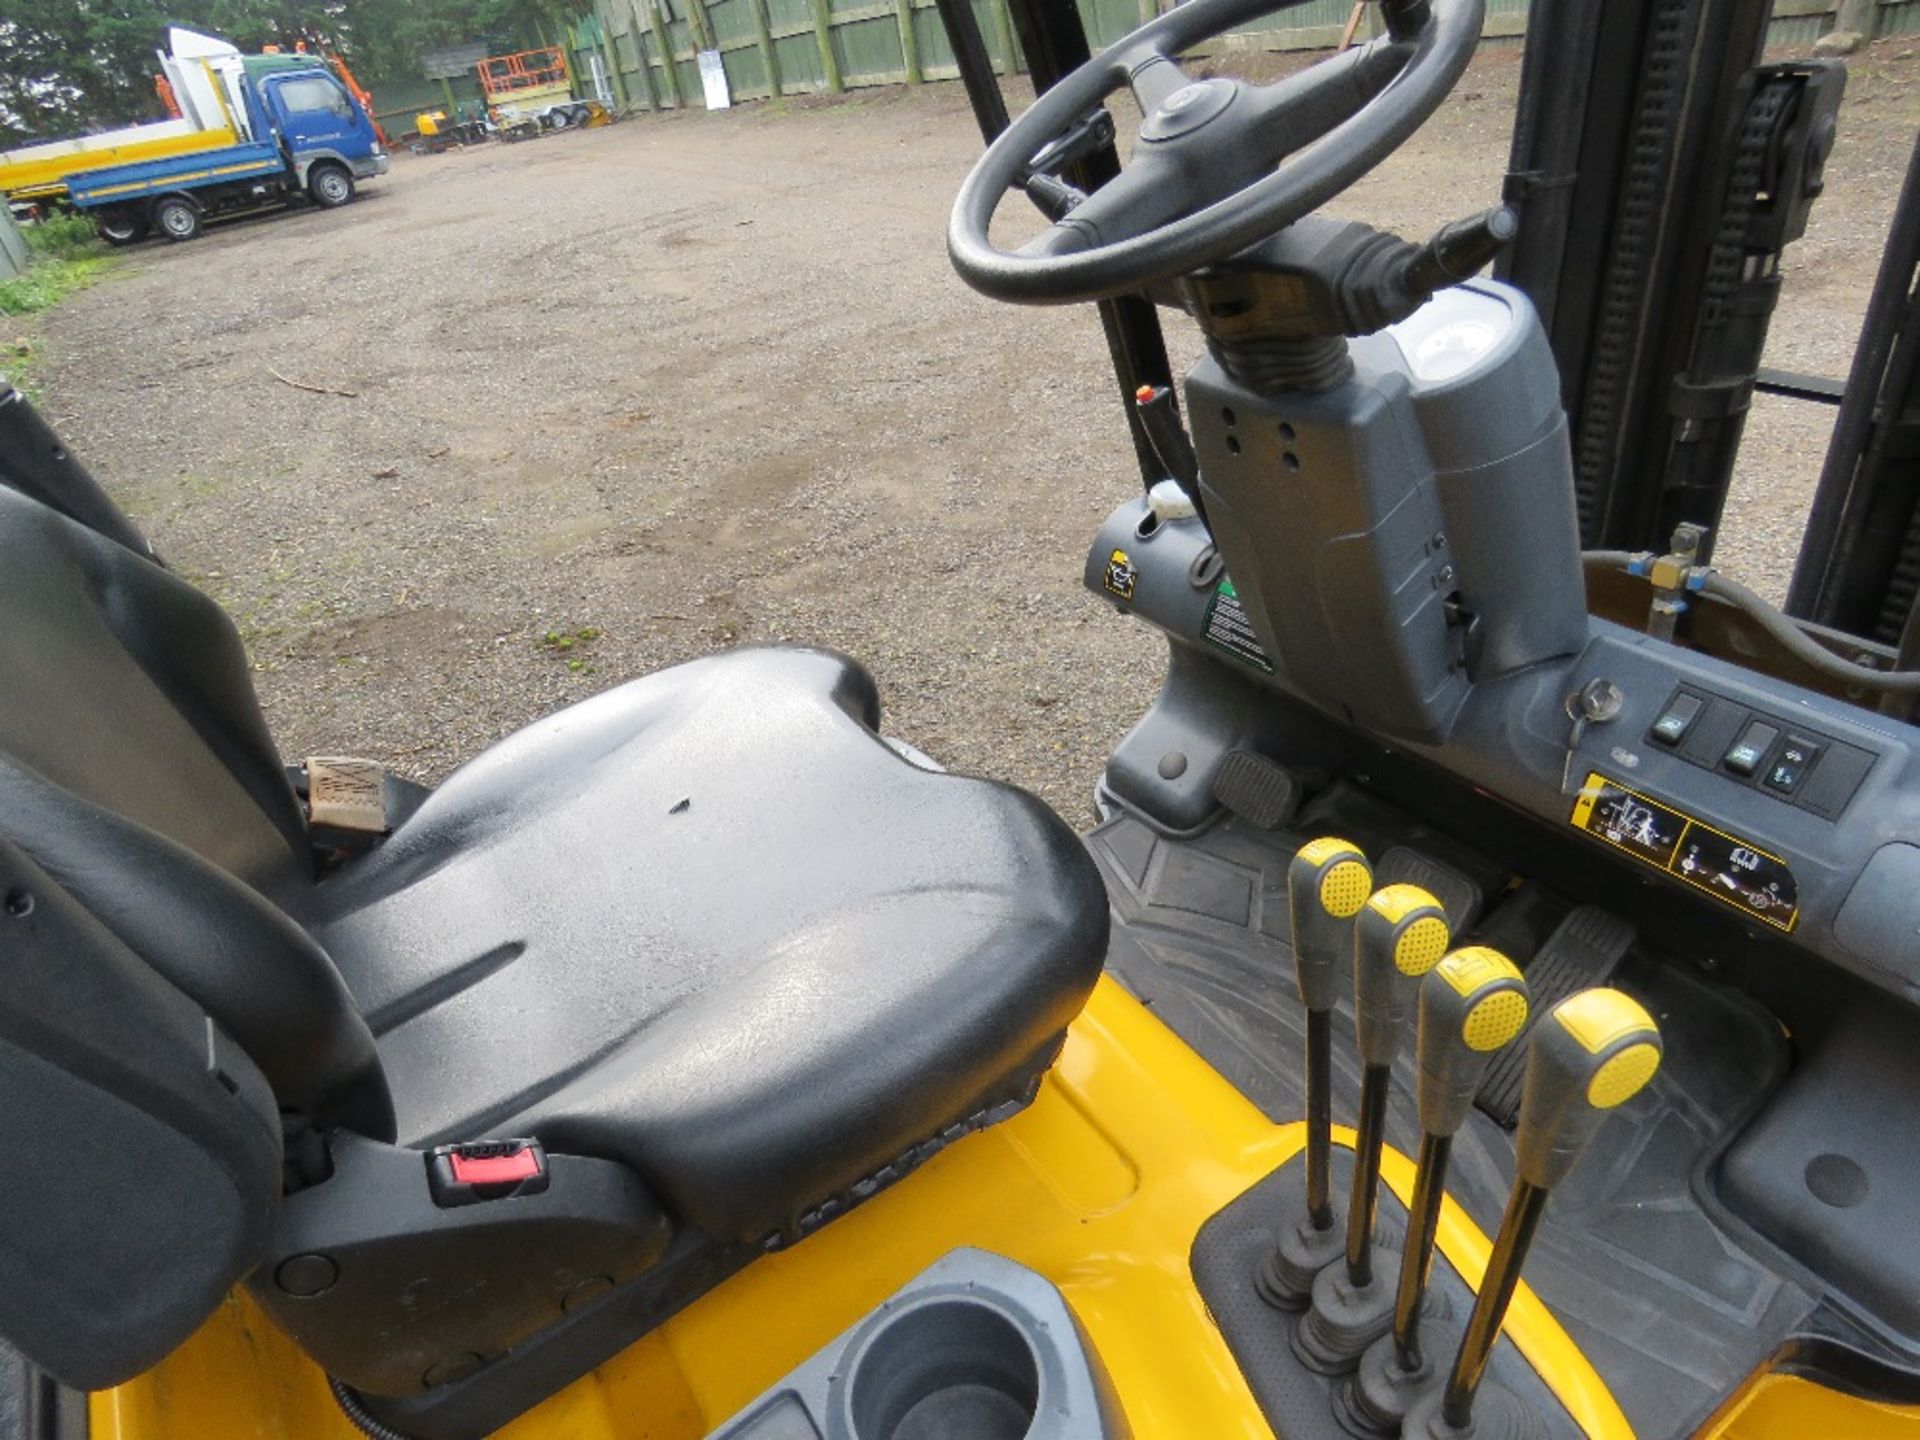 HYUNDAI 20L-7M GAS POWERED 2 TONNE FORKLIFT TRUCK. YEAR 2018 BUILD, LITTLE USED RECENTLY. - Image 8 of 12